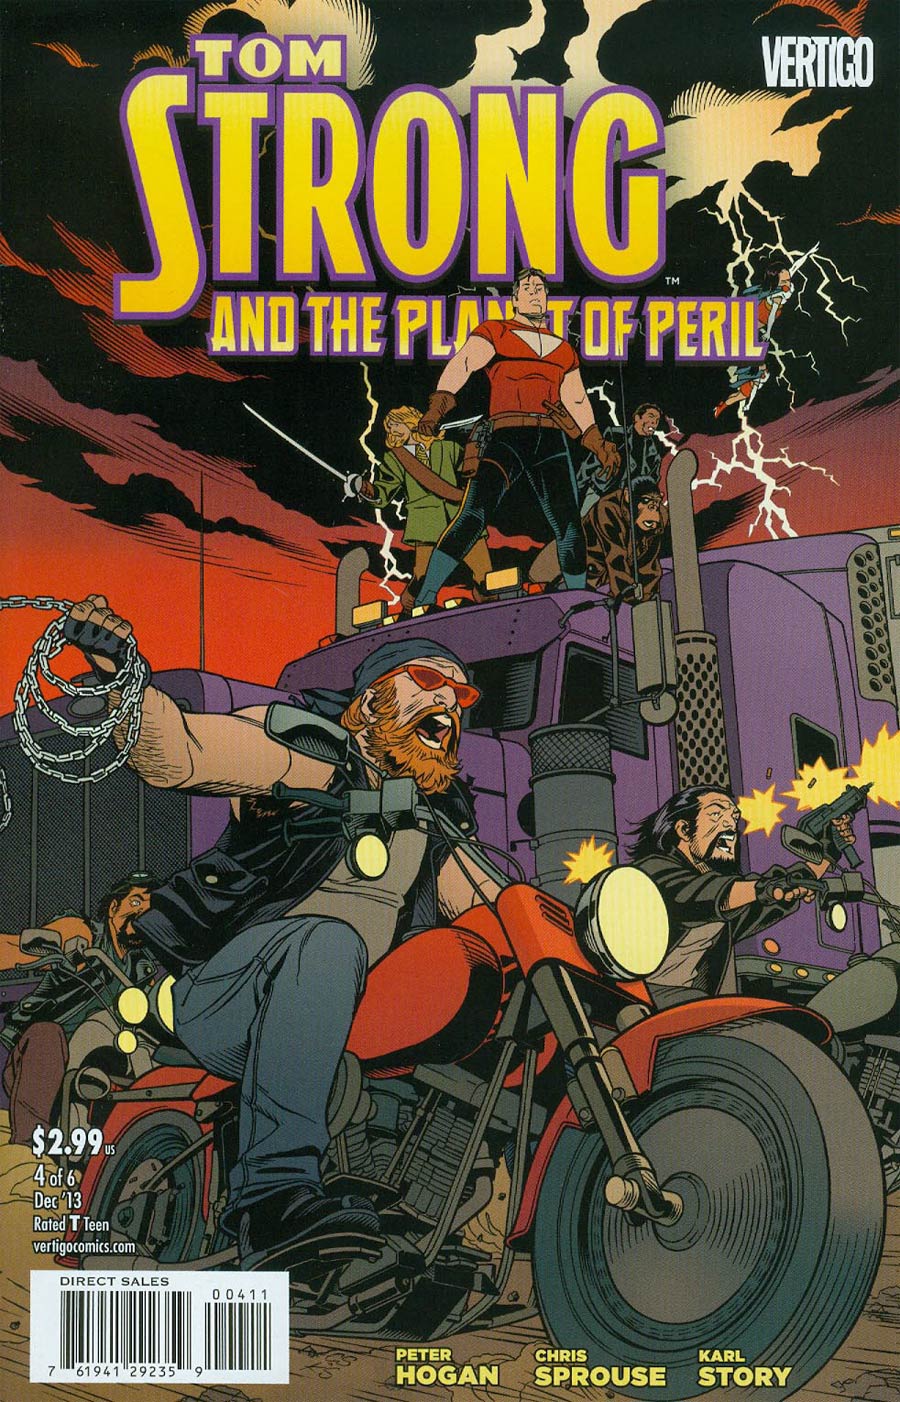 Tom Strong And The Planet Of Peril #4